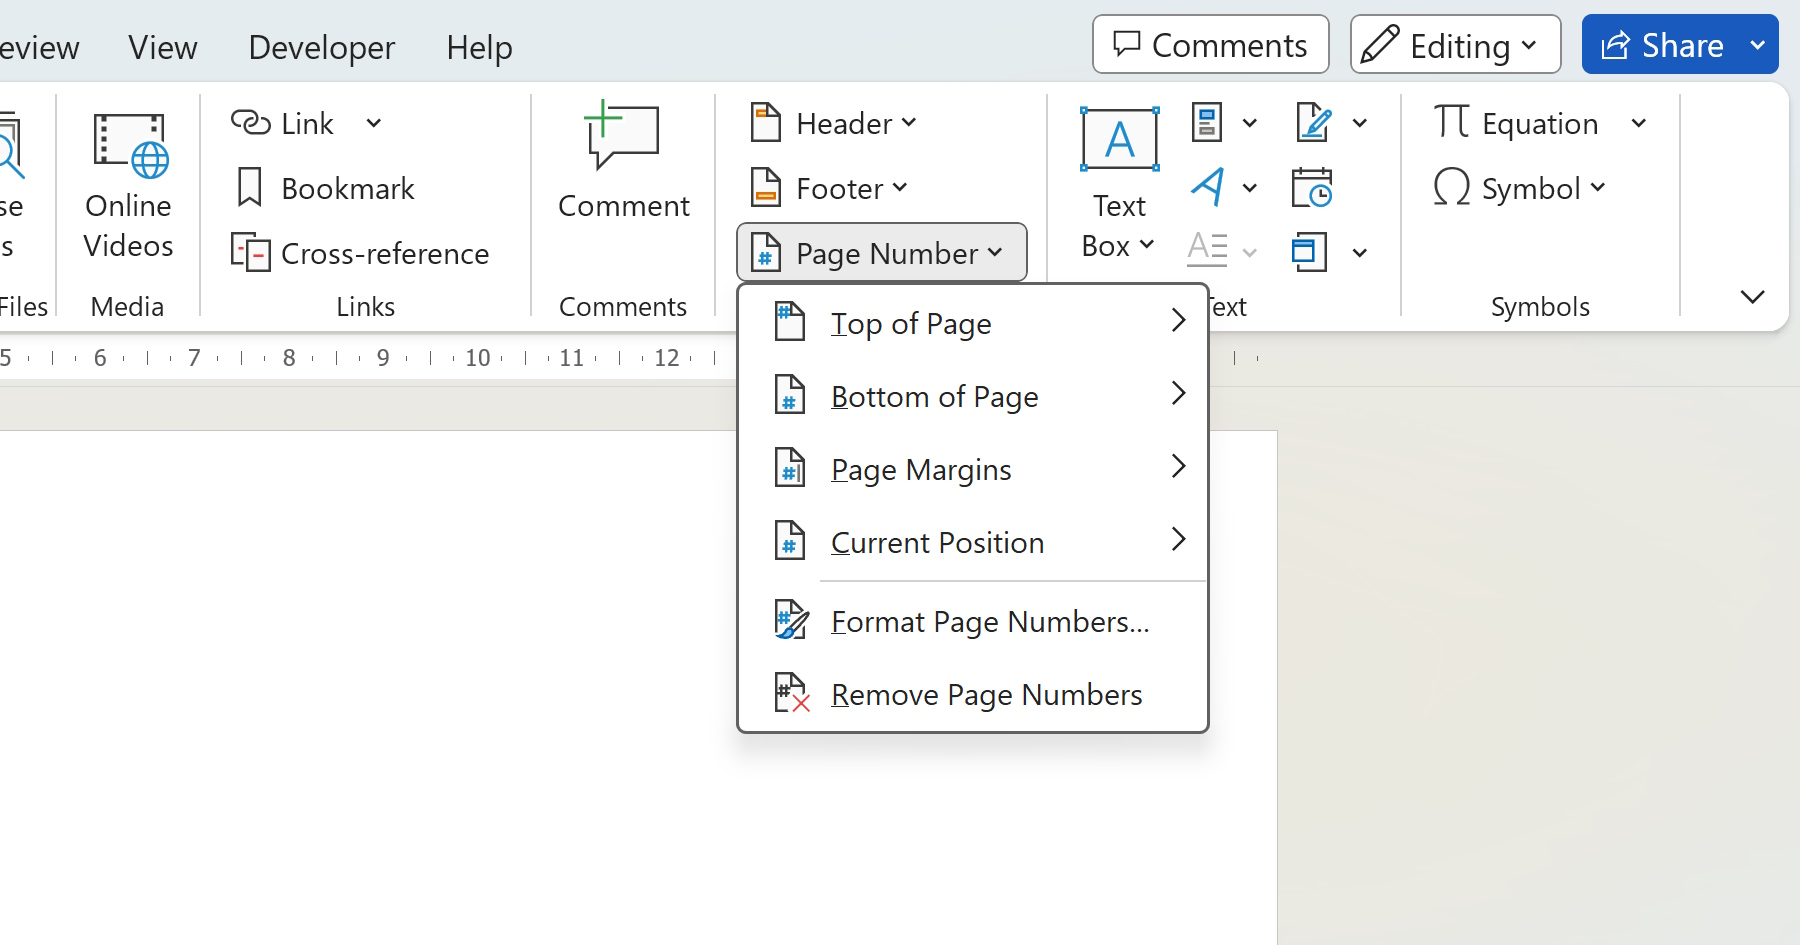 Learn how to easily put page numbers on Word and customize them to suit your needs. Follow the step-by-step guide and make your Word documents look more professional and organized.